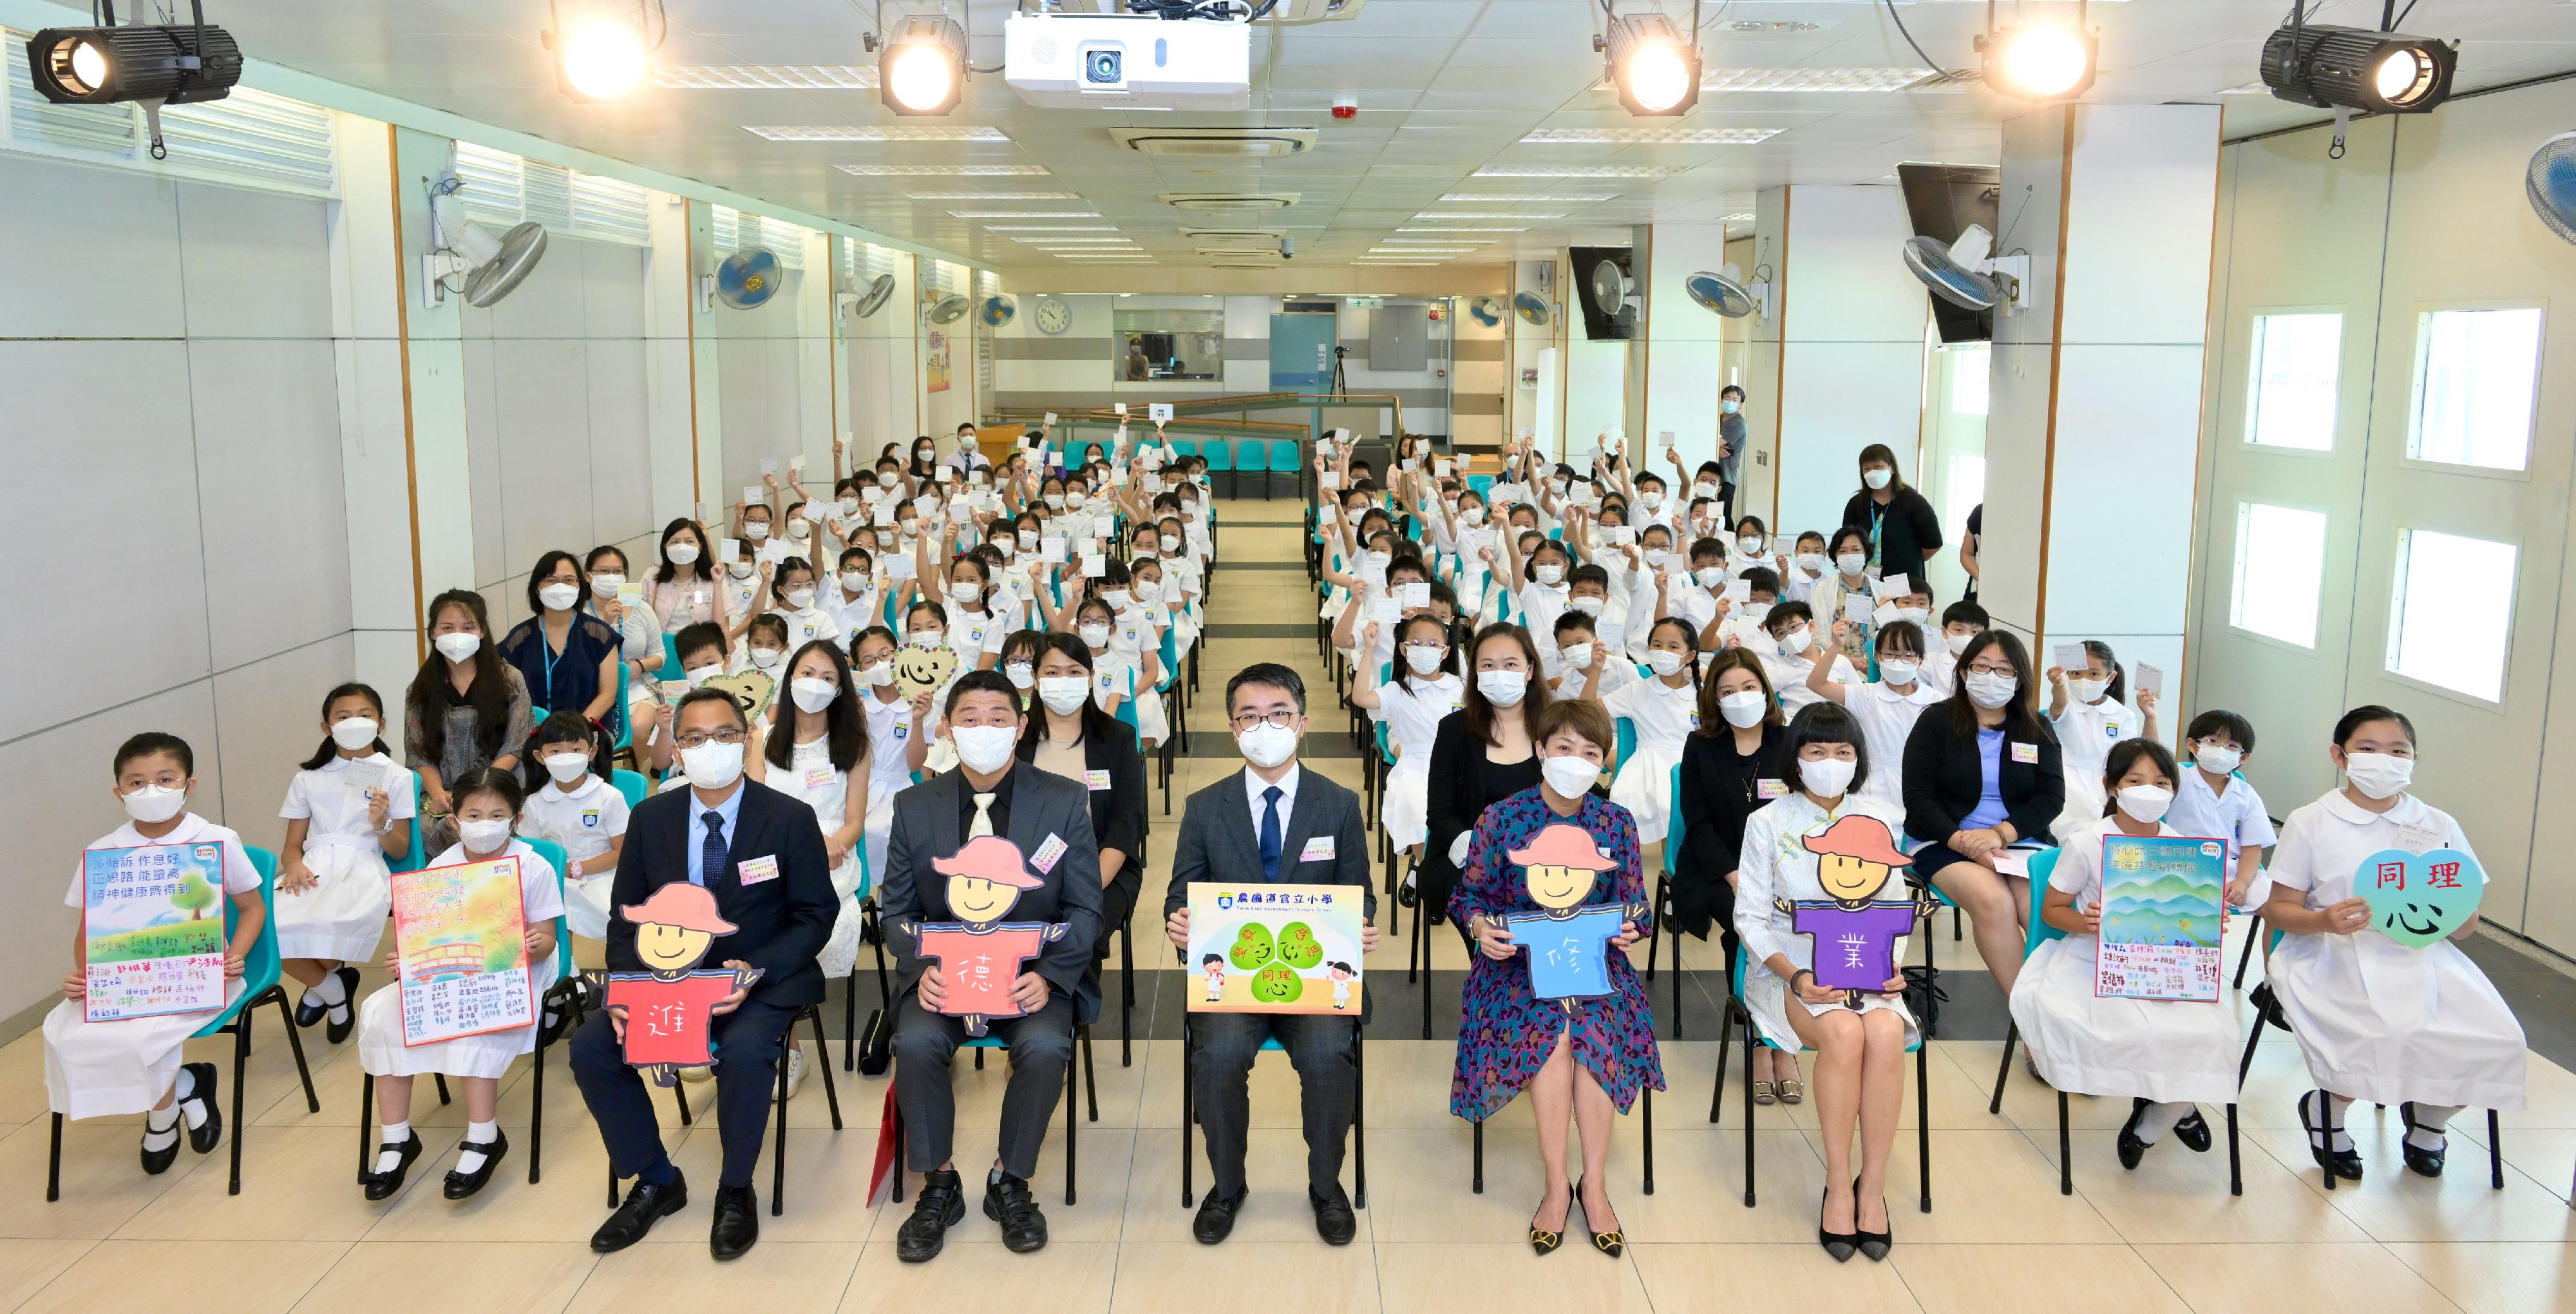 The Under Secretary for Education, Mr Sze Chun-fai (front row, centre), visited Farm Road Government Primary School on the first school day today (September 1). The school arranged an activity for students to give away "Start the Day Full of Energy" cheer-up cards, with a view to promoting to fellow students the importance of mental health. Mr Sze took the opportunity to encourage the school to promote the tips and e-reminder for parents on "Home-School Collaboration: Welcome to the New School Year" produced by the Education Bureau to parents.